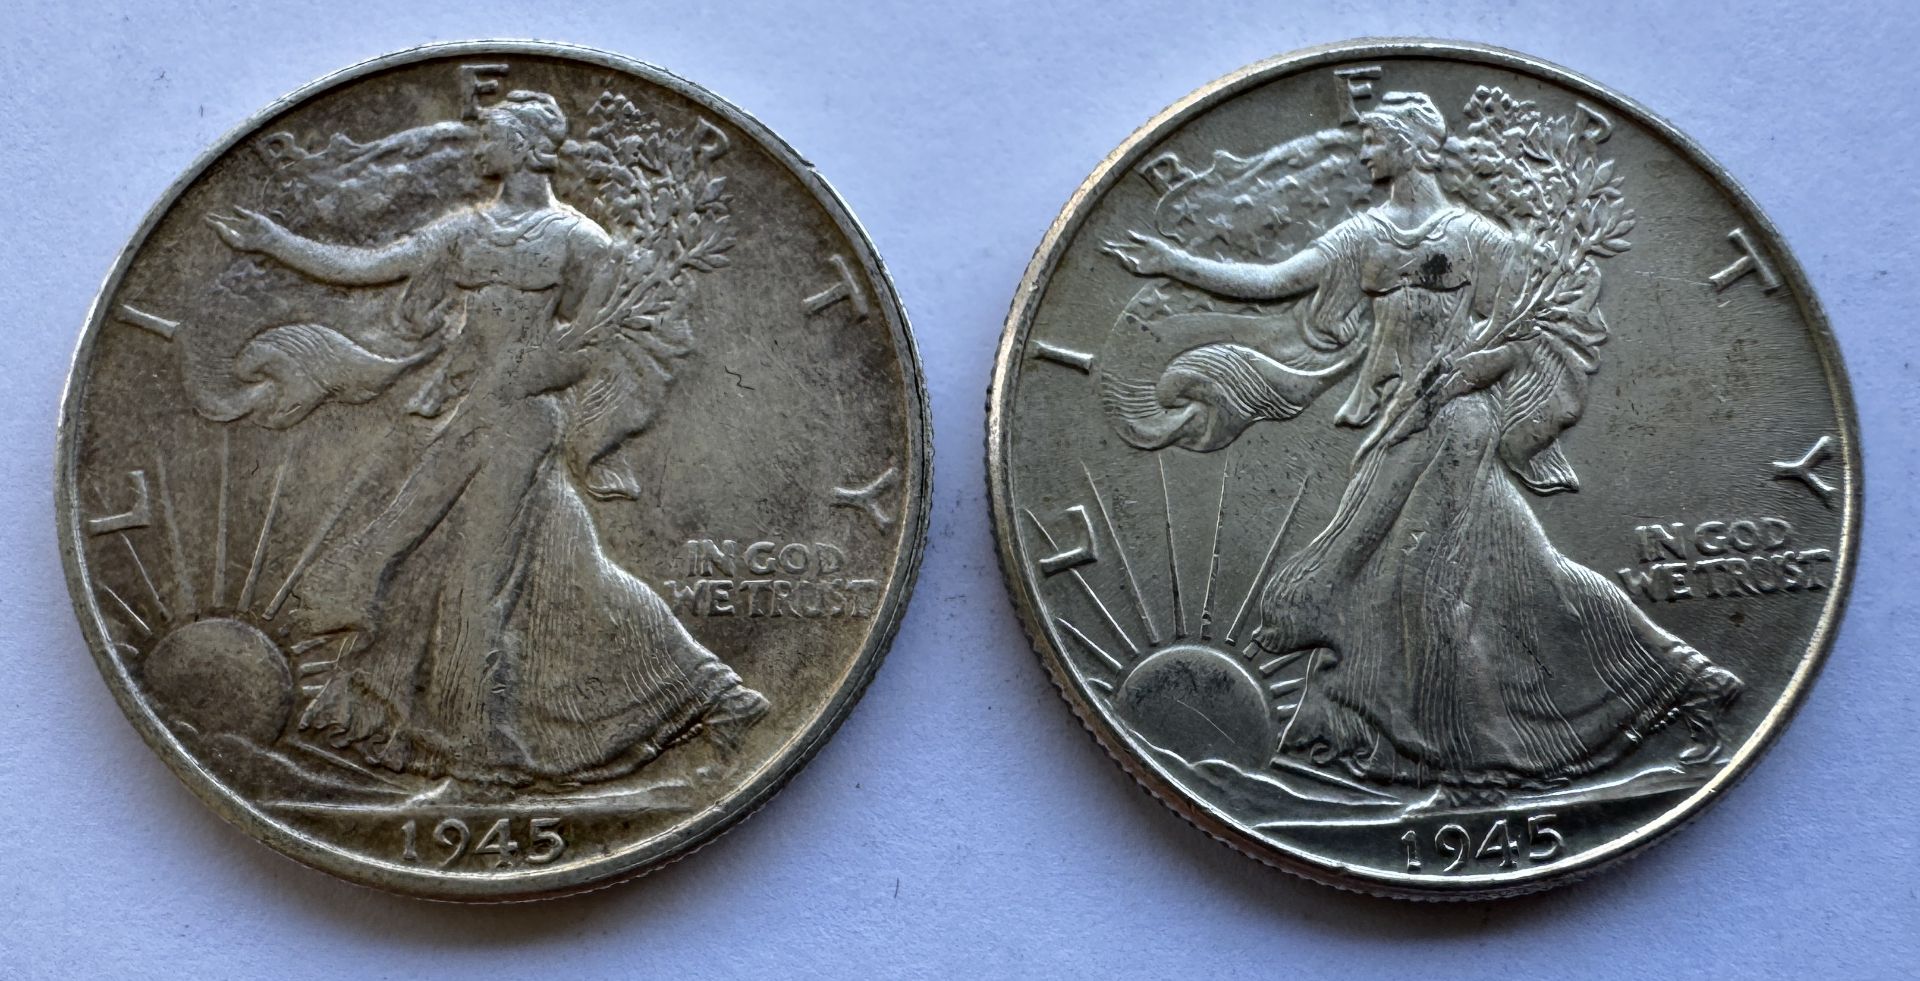 TWO PIECES OF 1945 WALKING LIBERTY HALF DOLLAR COIN